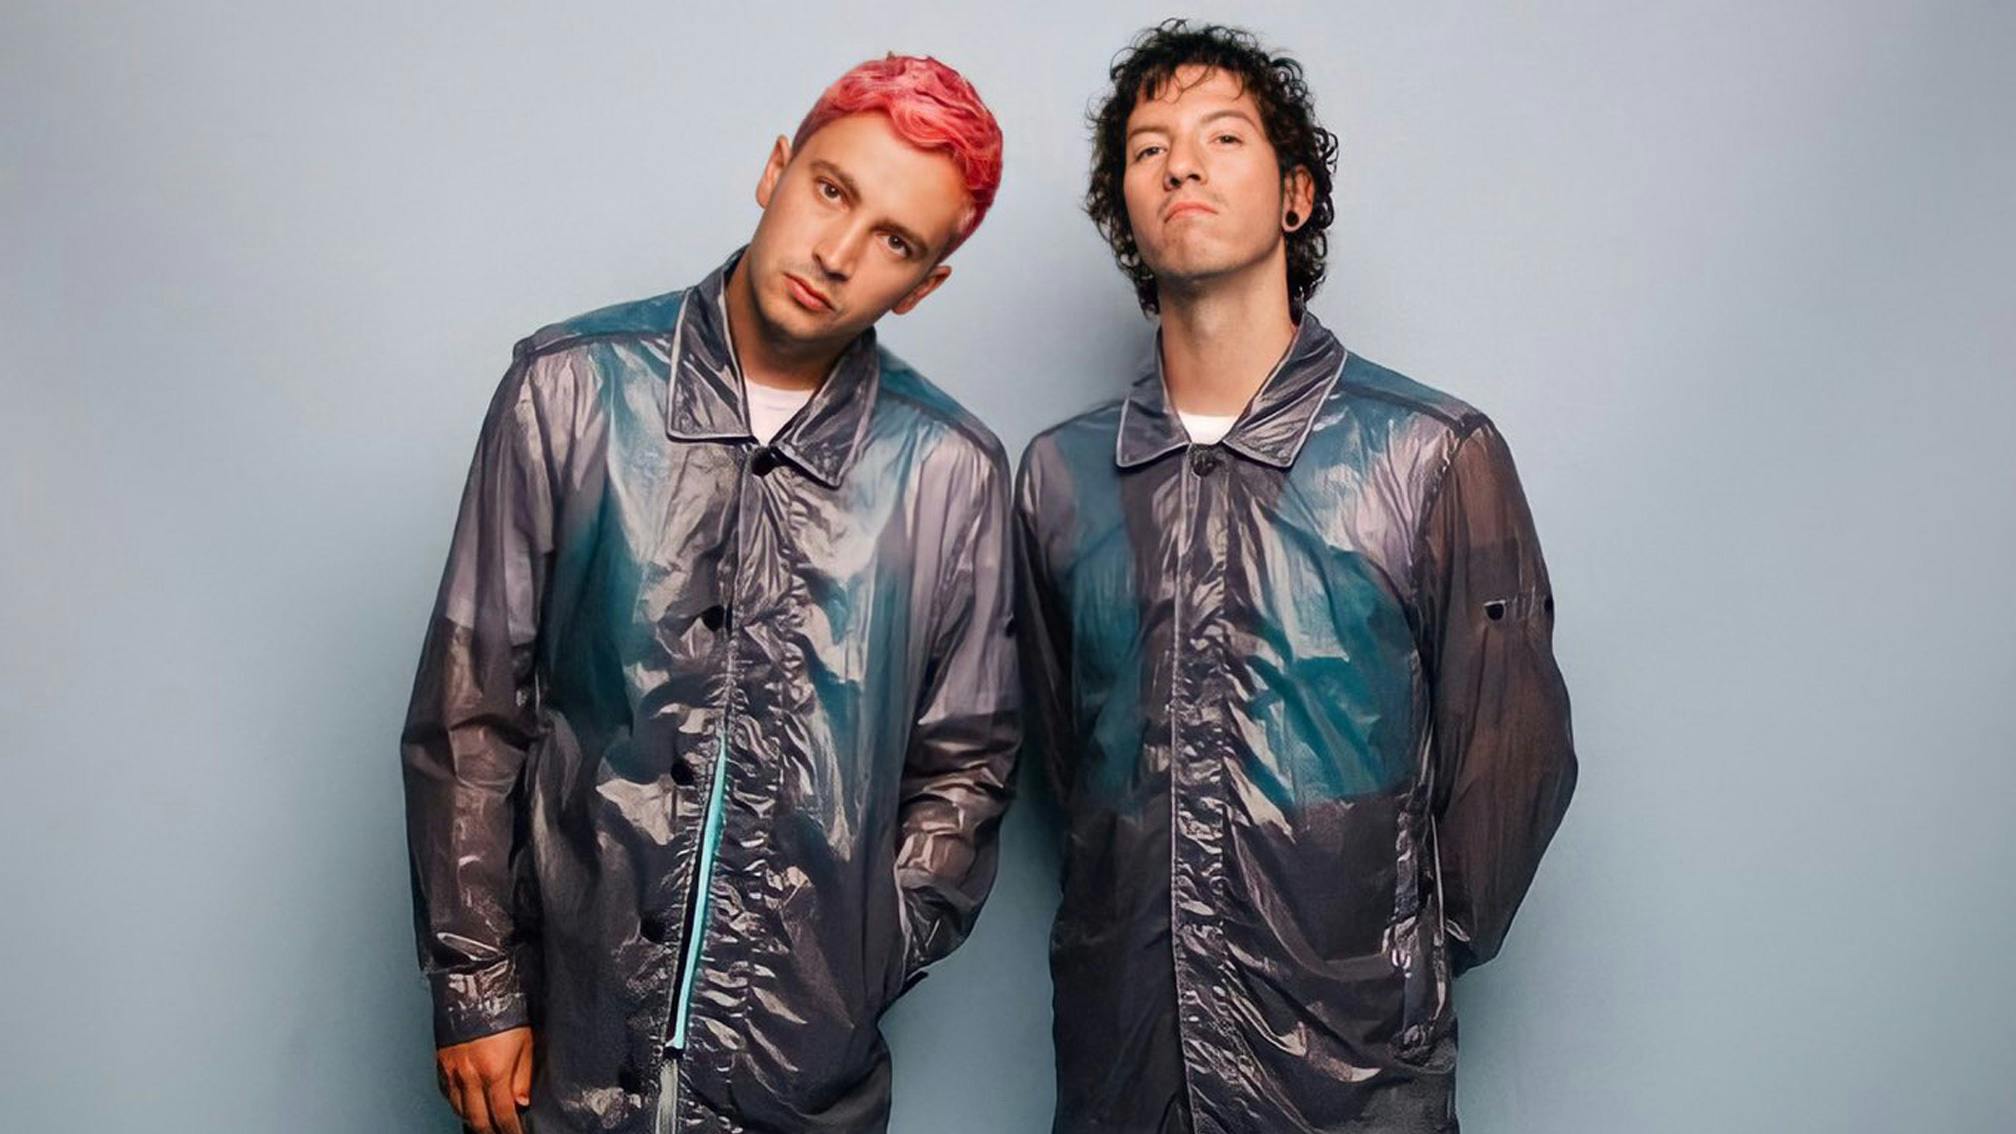 Here's twenty one pilots' setlist from their first proper show since 2019